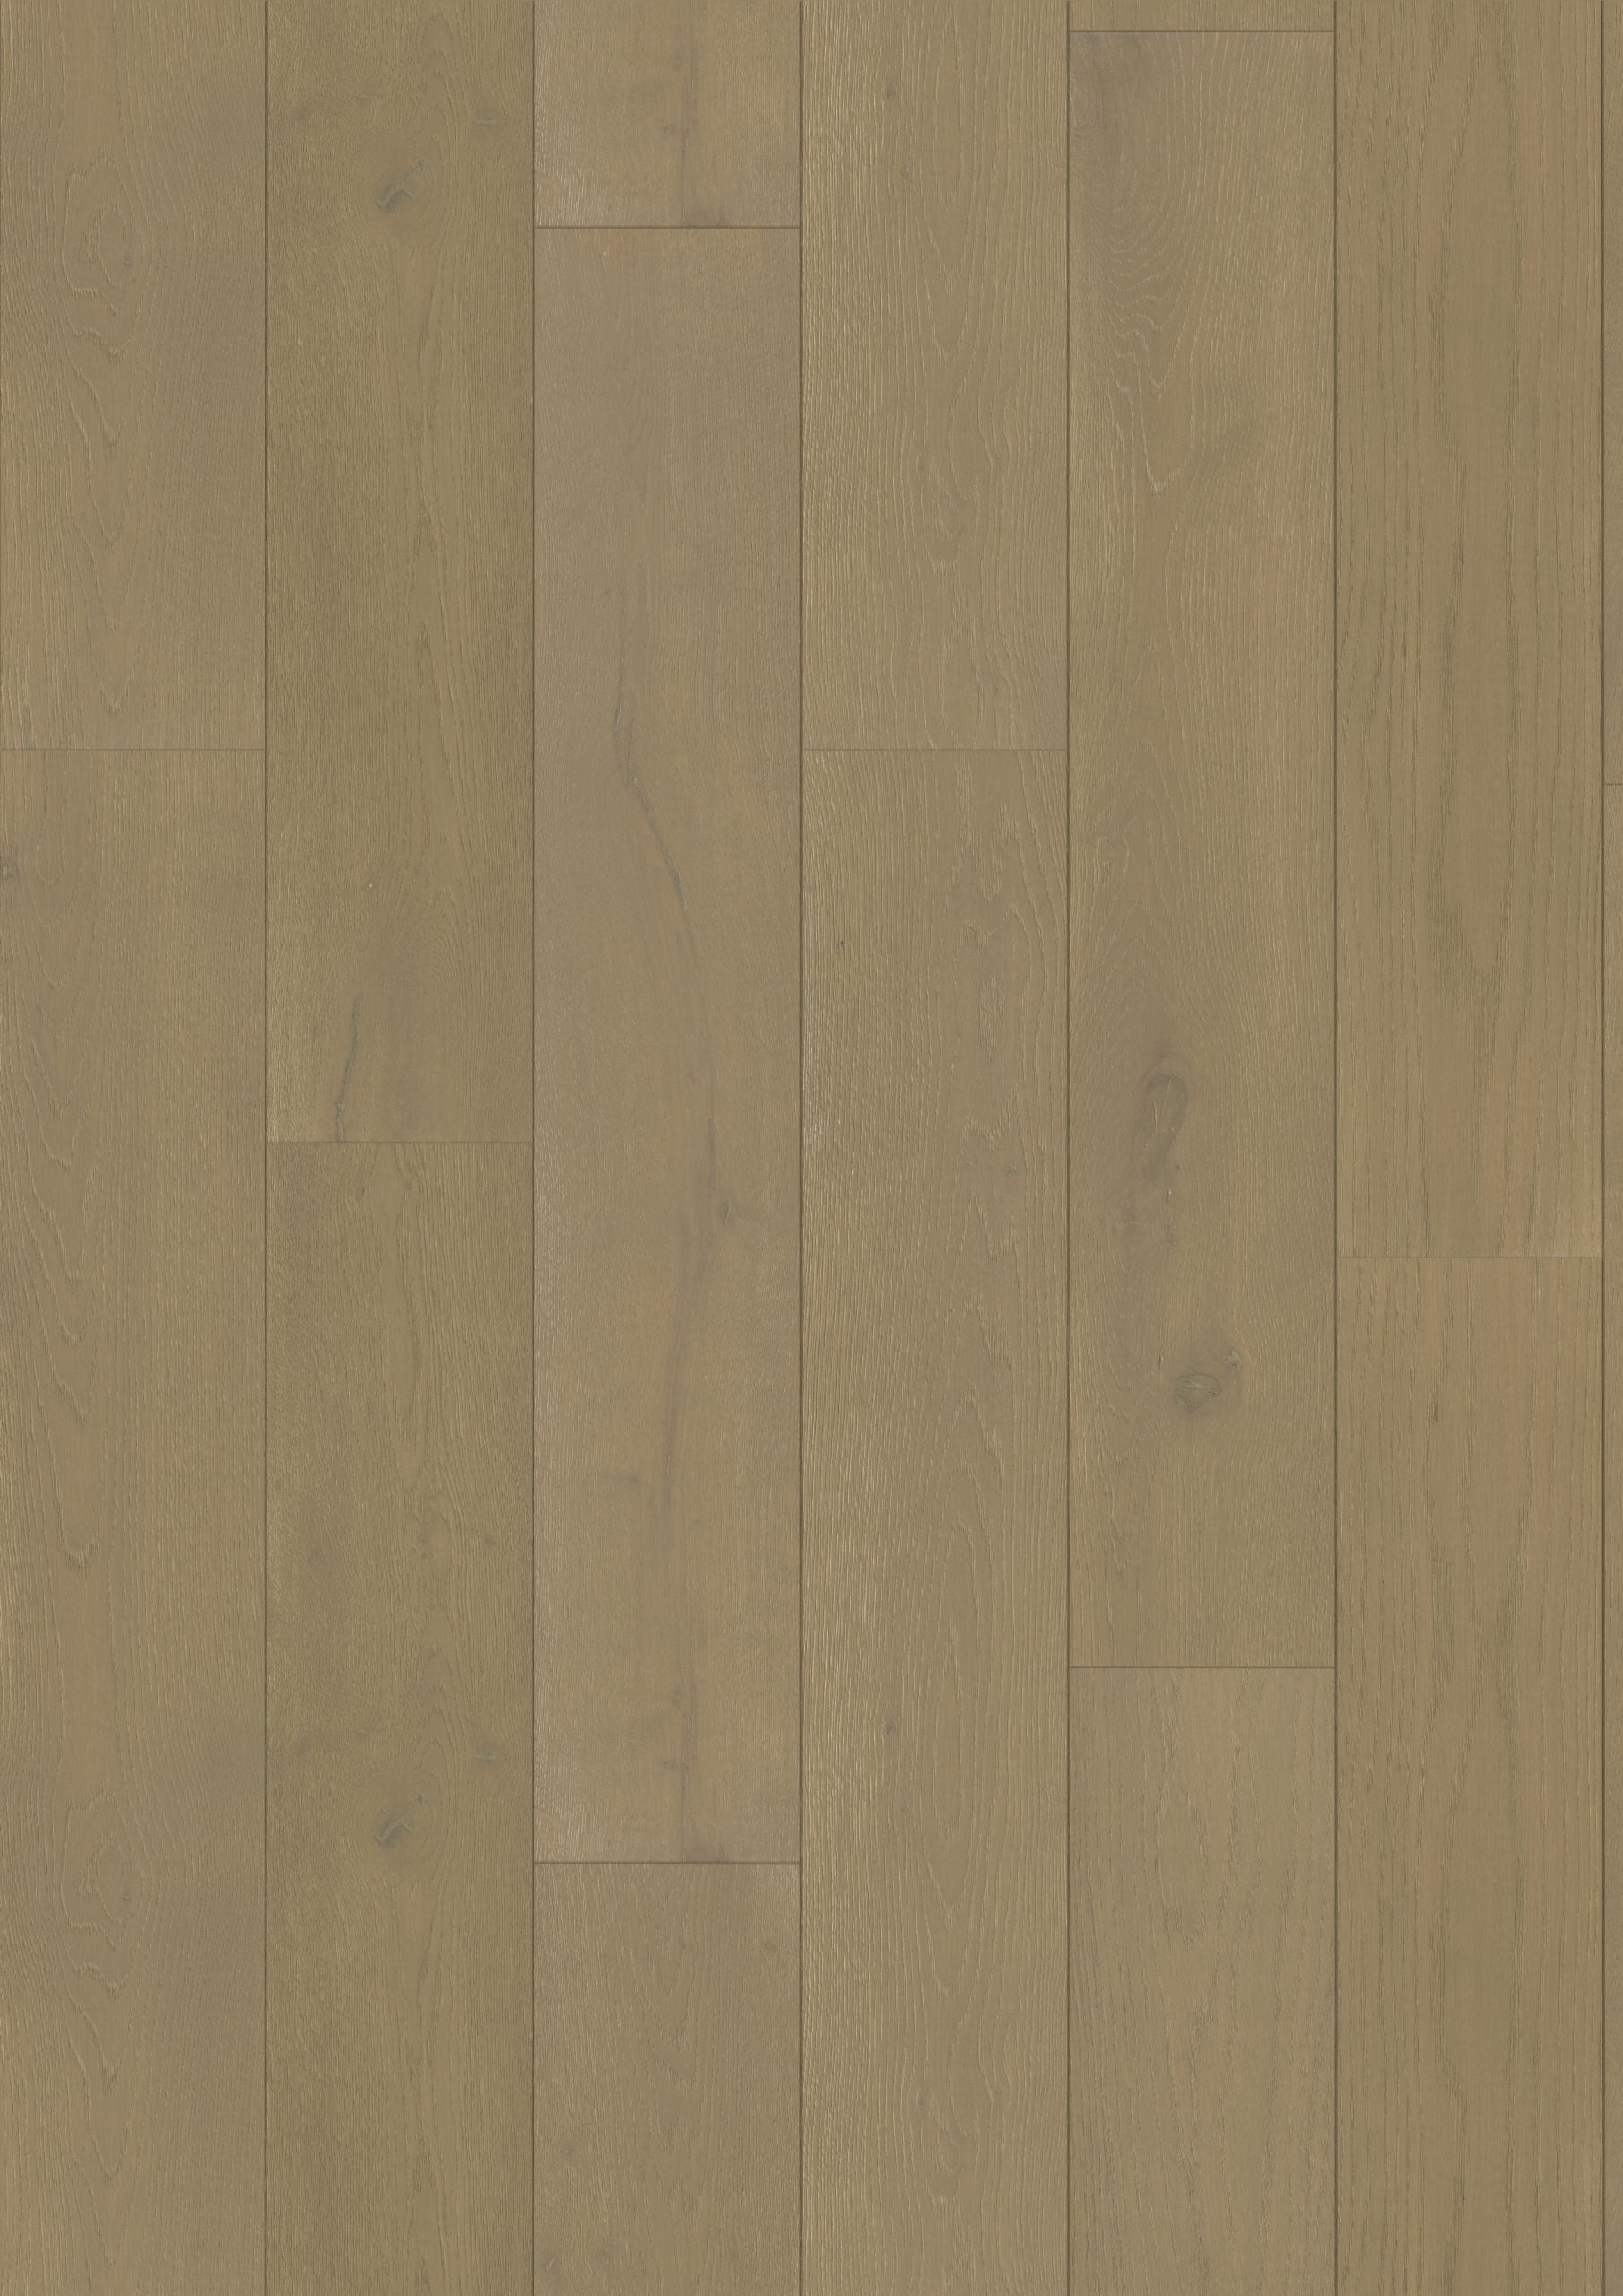 teka royal stirling german french white oak natural hardwood flooring plank stained taupe distributed by surface group international